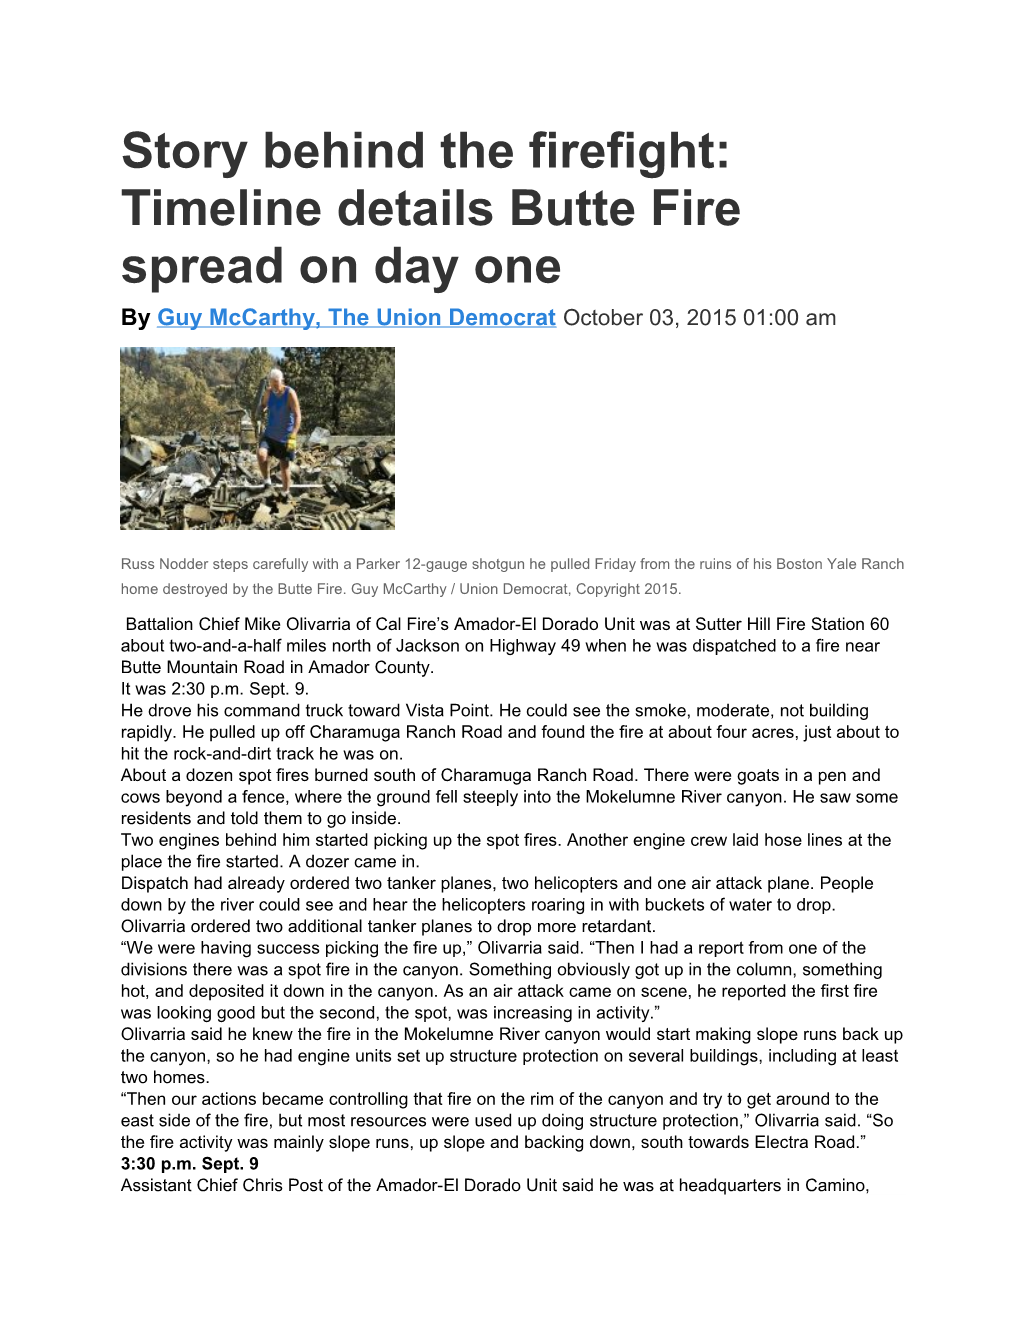 Story Behind the Firefight: Timeline Details Butte Fire Spread on Day One